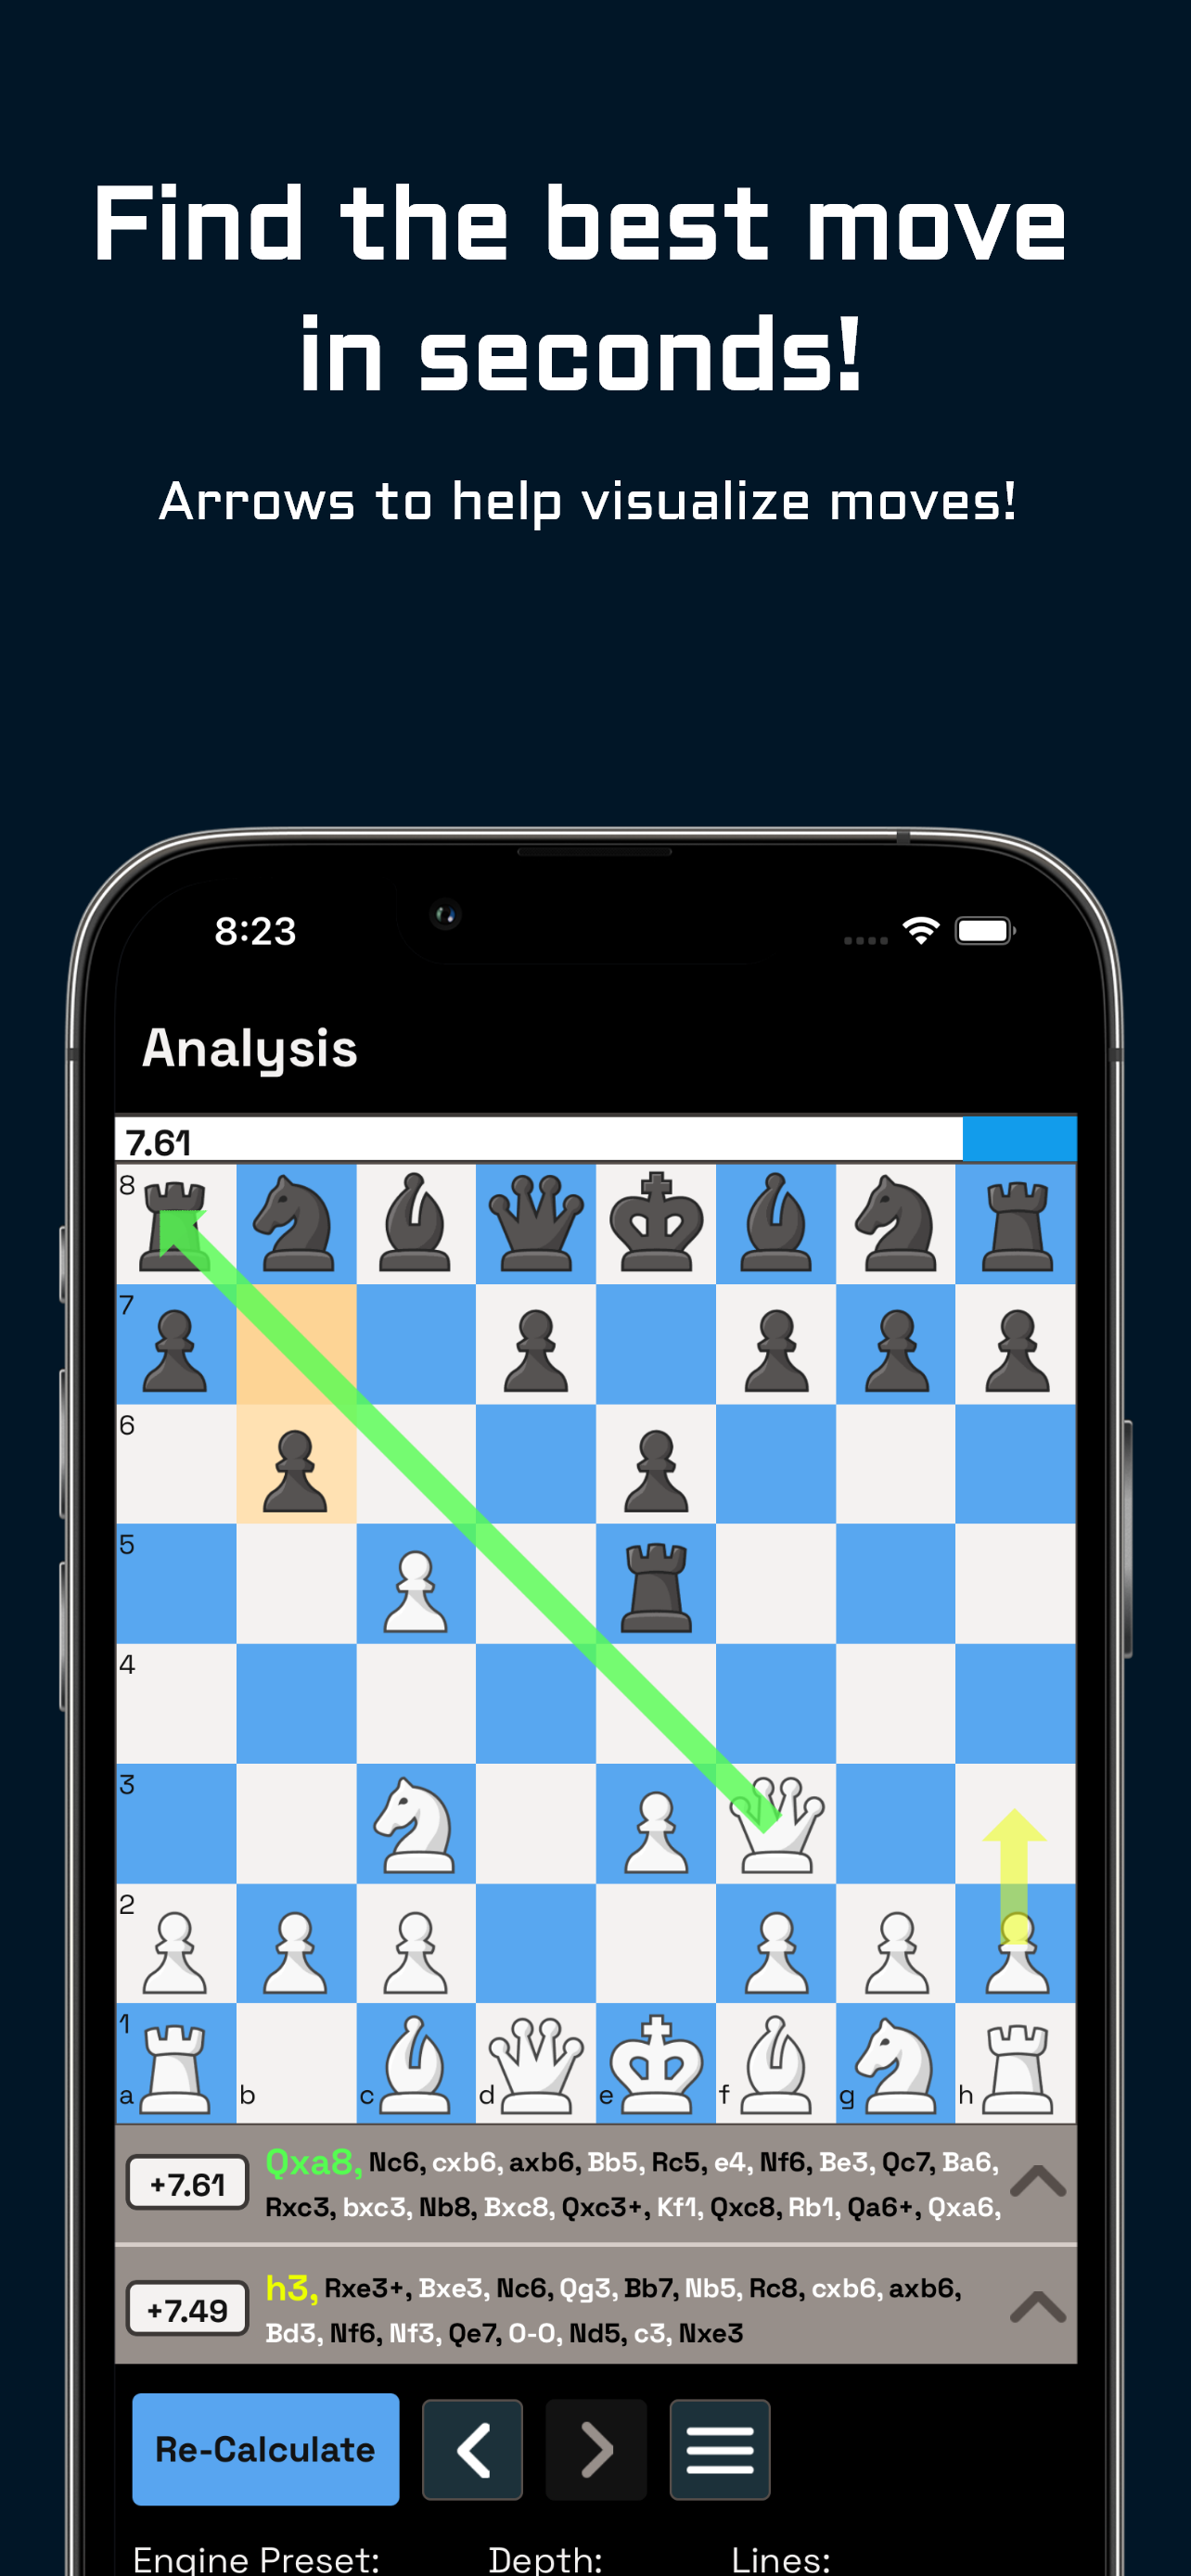 Next Chess Move App Stats: Downloads, Users and Ranking in Google